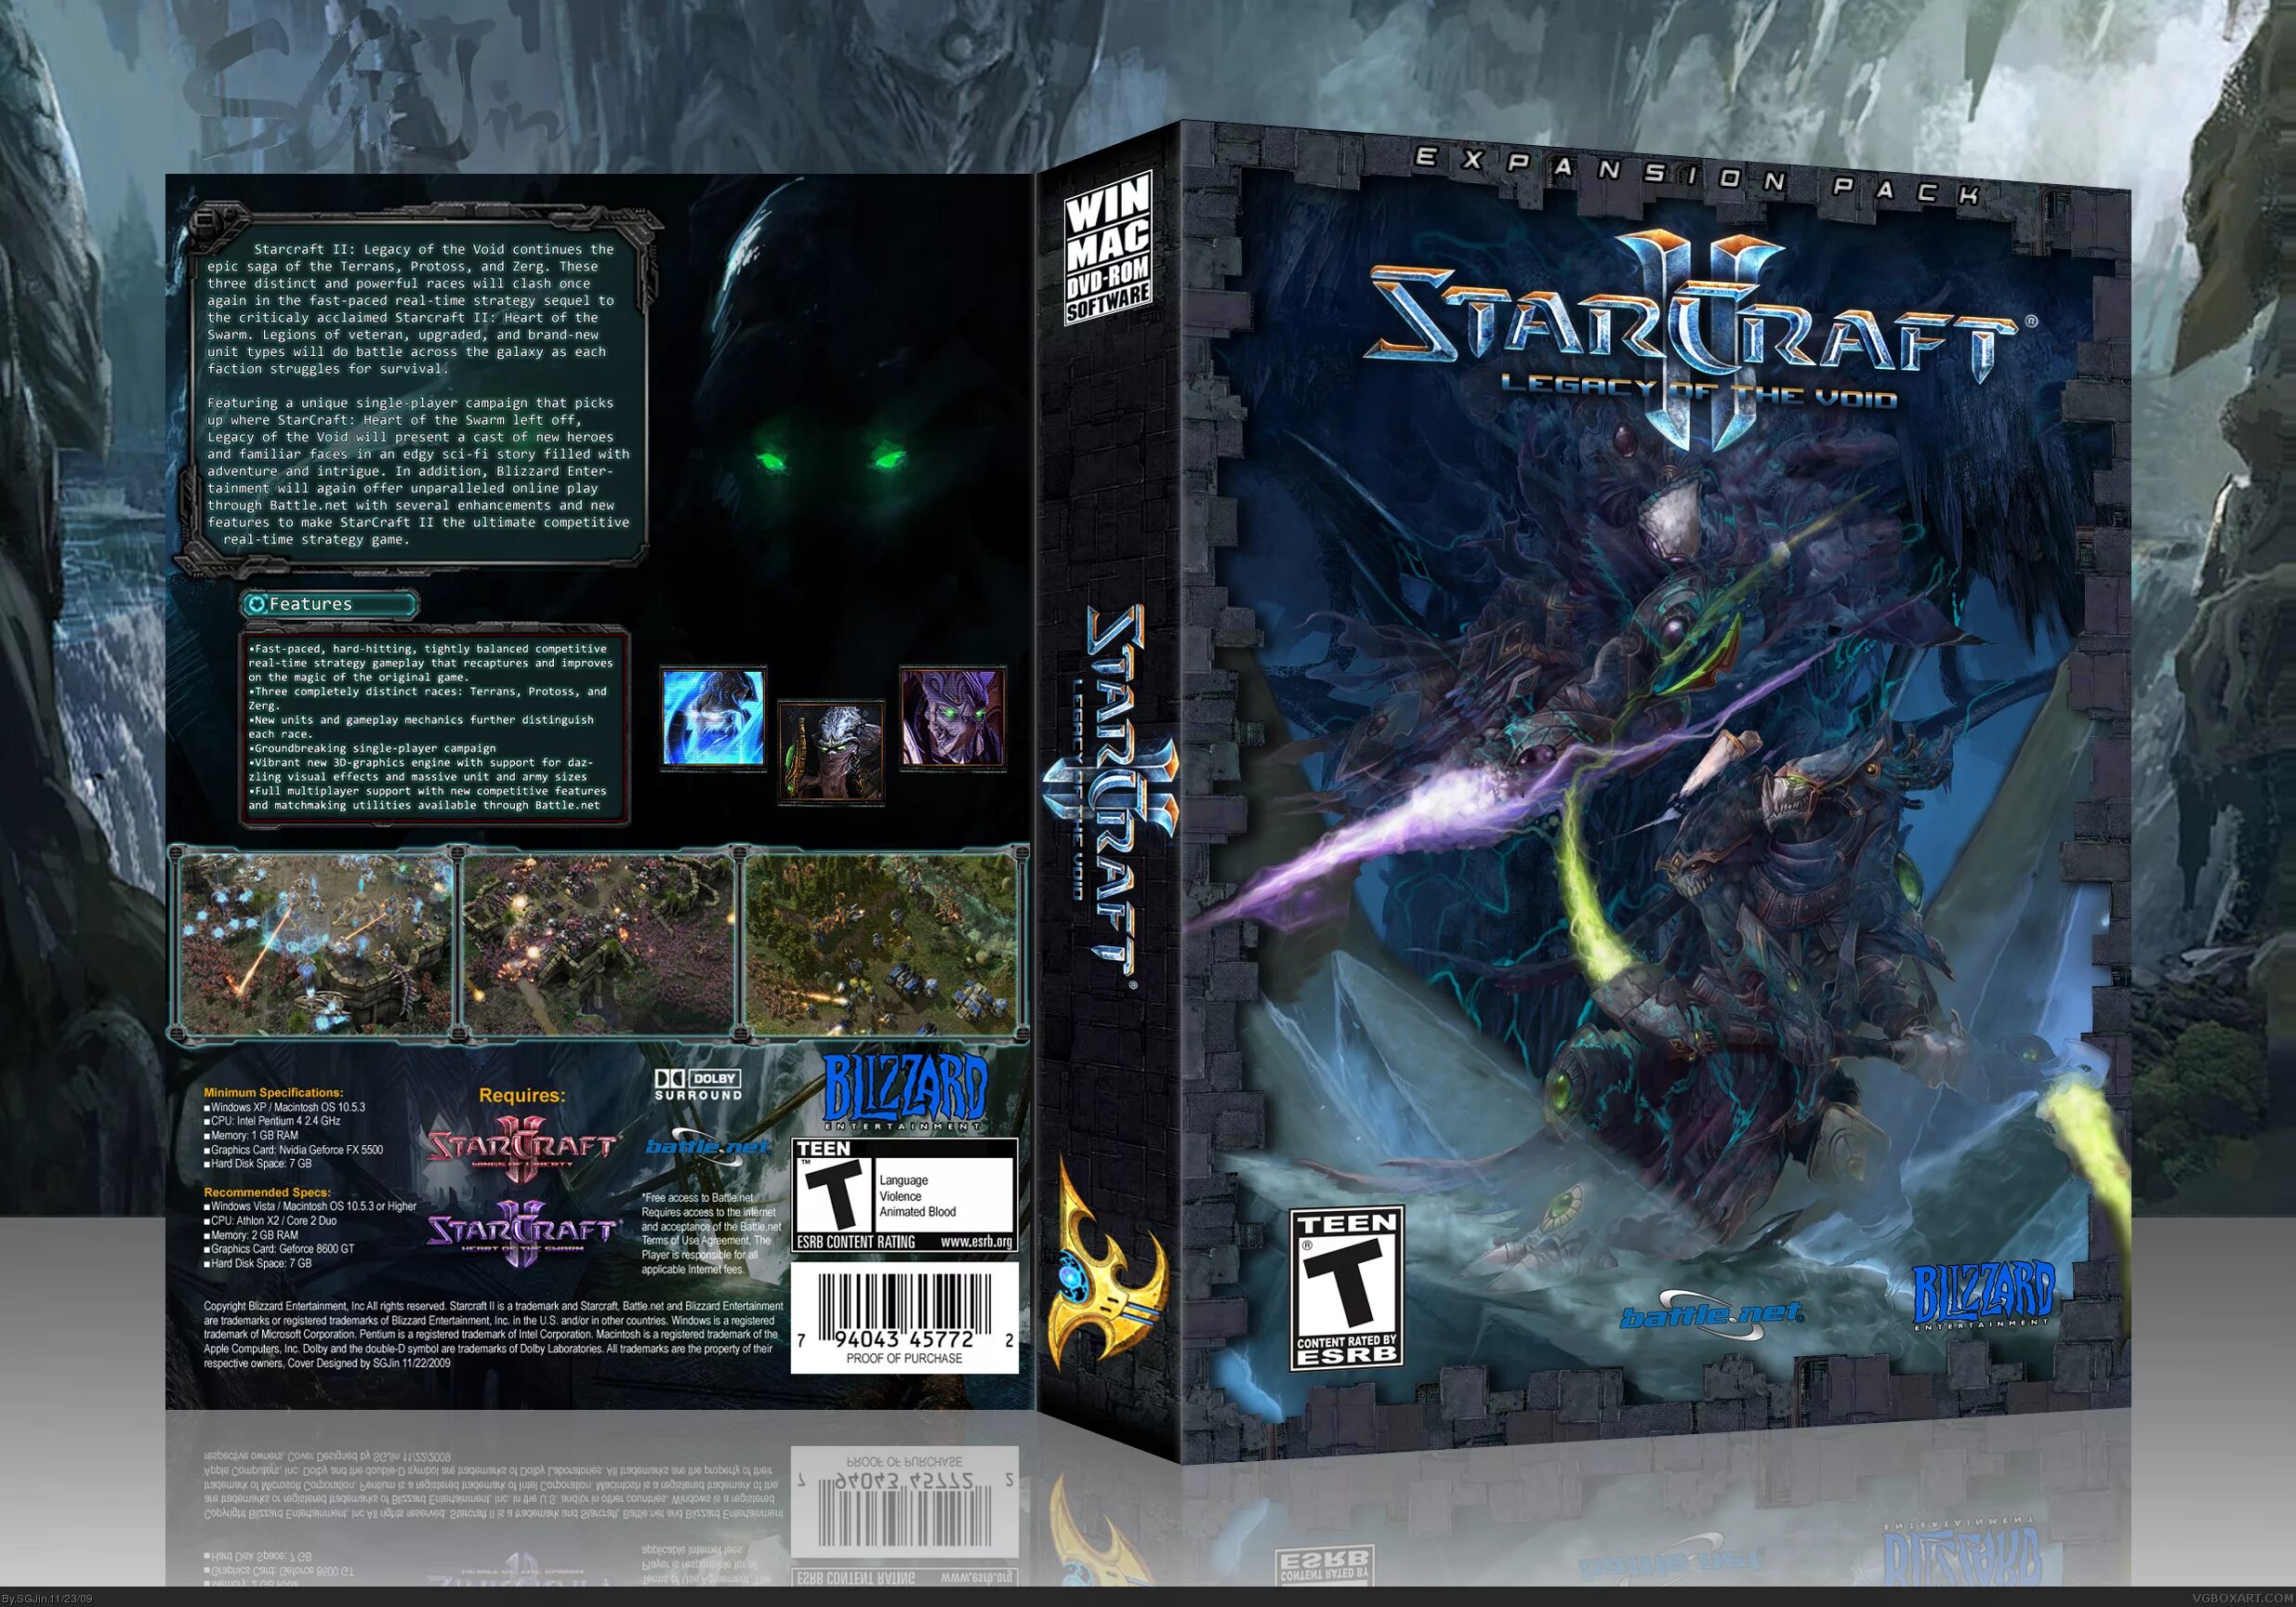 STARCRAFT 2 Legacy of the Void диск. STARCRAFT 2 Legacy of the Void обложка. Диск старкрафт 2 Legacy of the Void. Старкрафт Legacy of the Void. Voices of the void craft